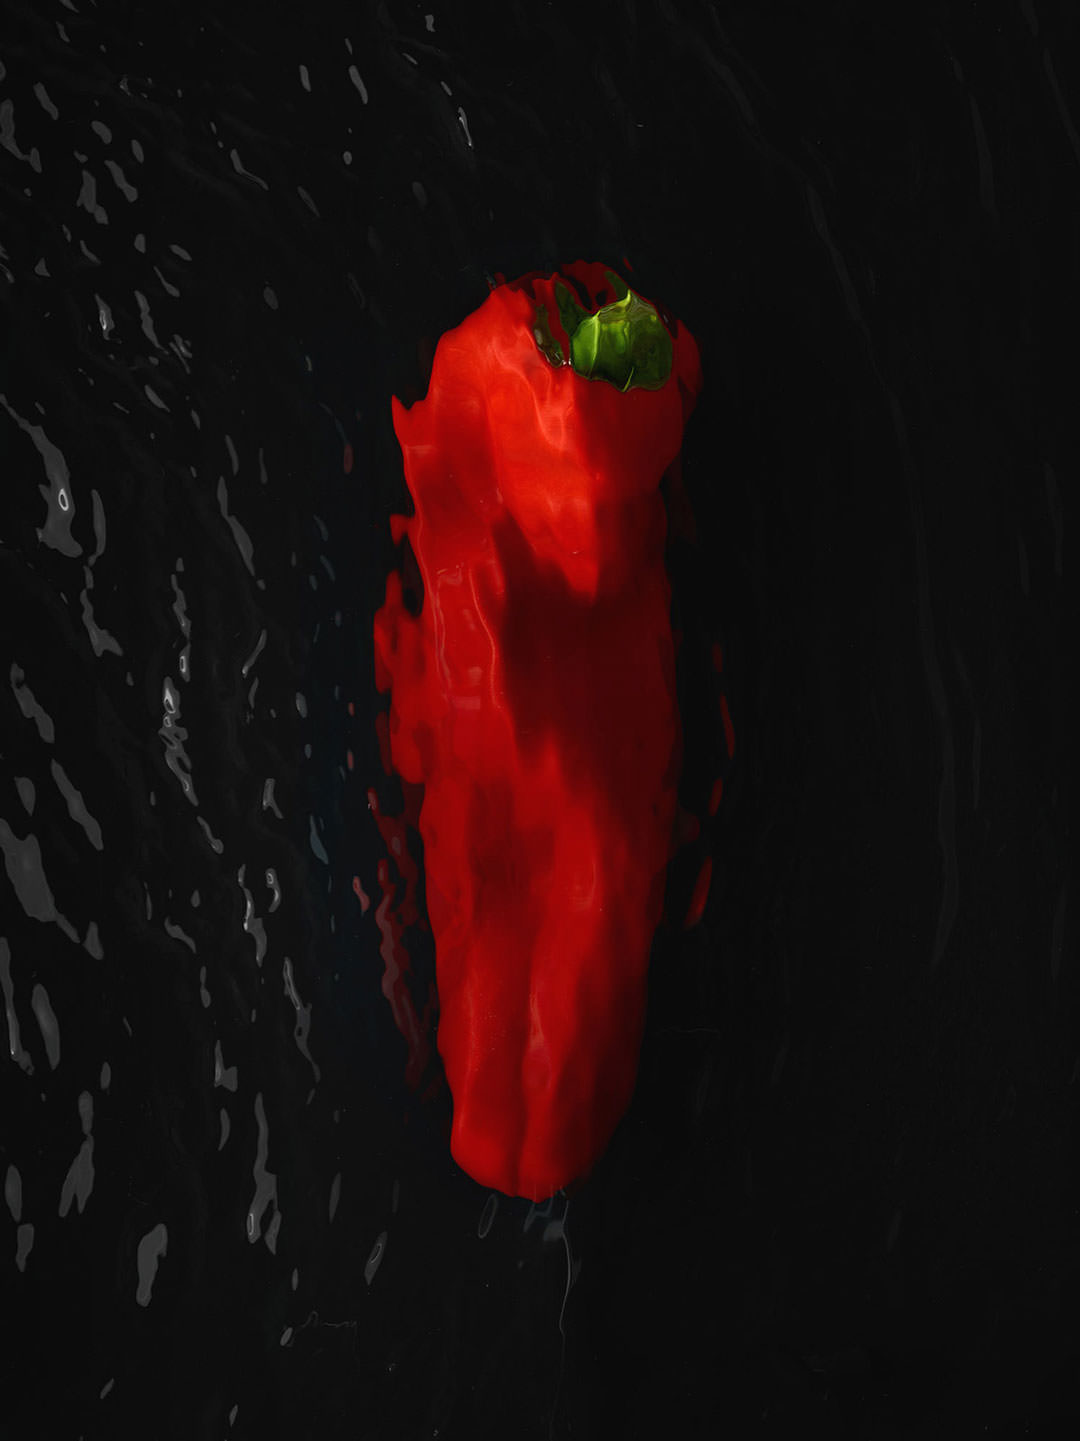 Red Pepper underwater with ripples distorting the shape of the pepper  - London Food & Drinks Photographer